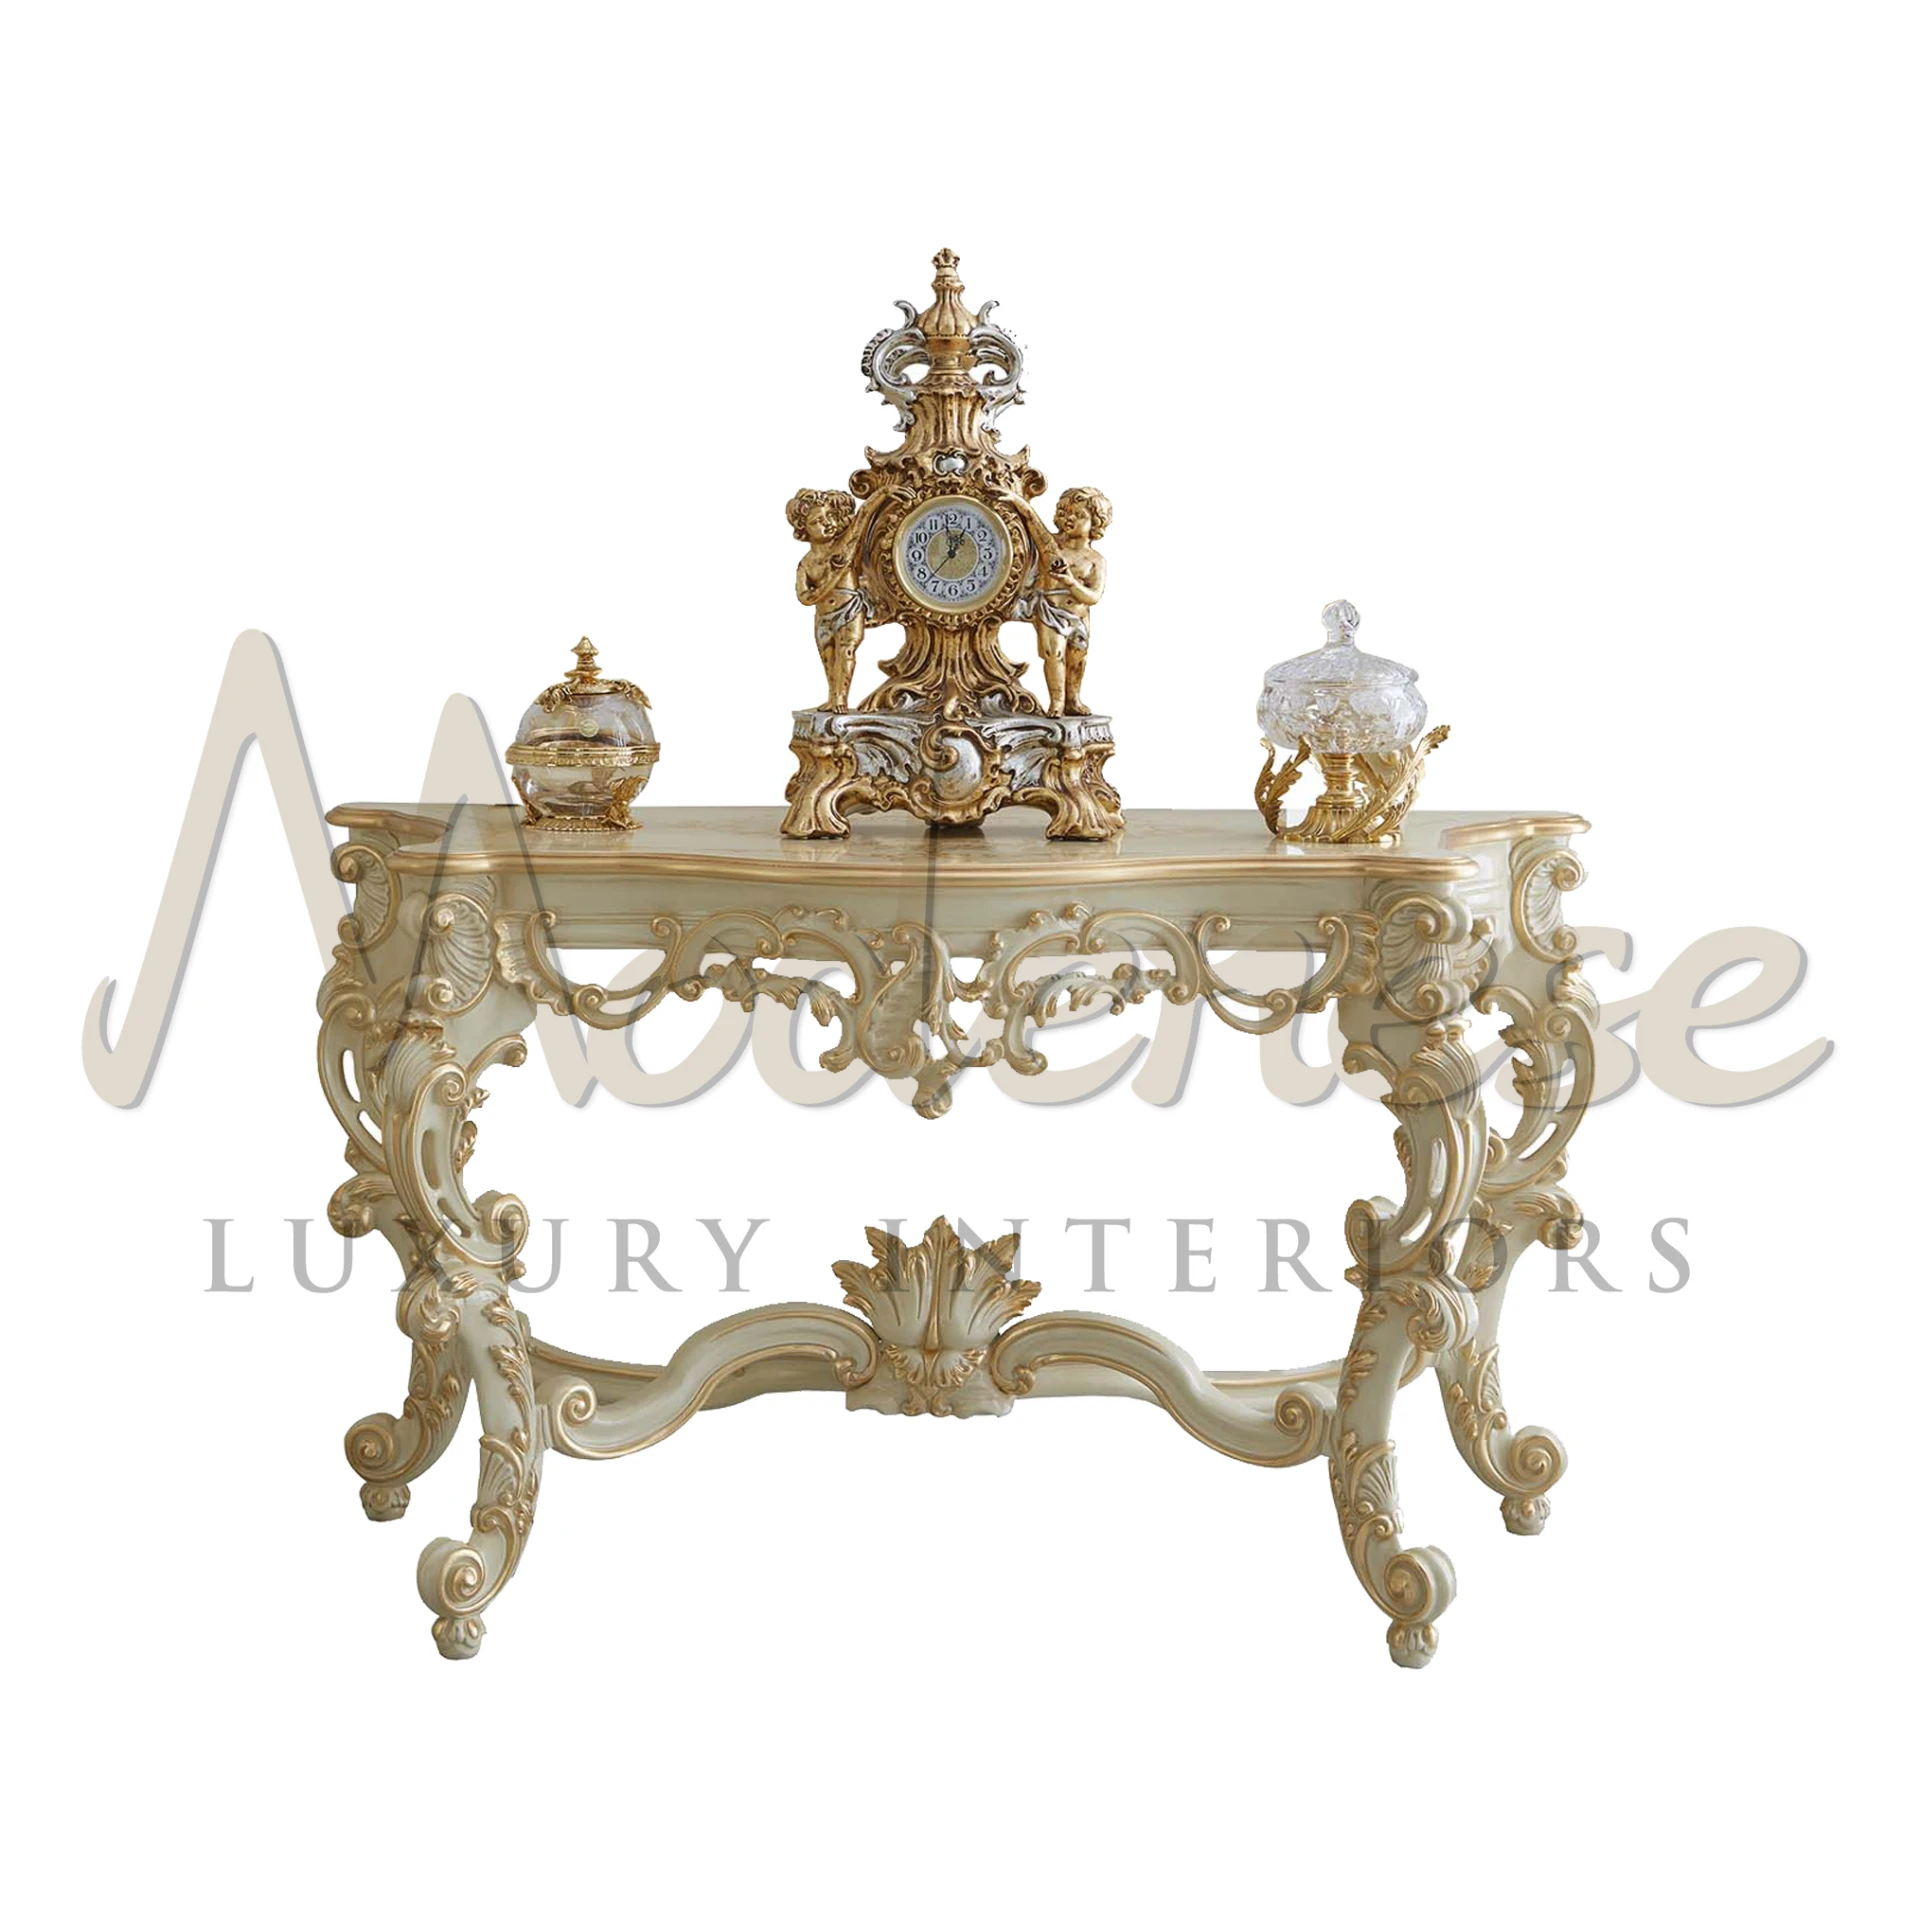 Luxurious Baroque Rectangular Console by Modenese Interiors, showcasing Italian craftsmanship and solid wood construction.